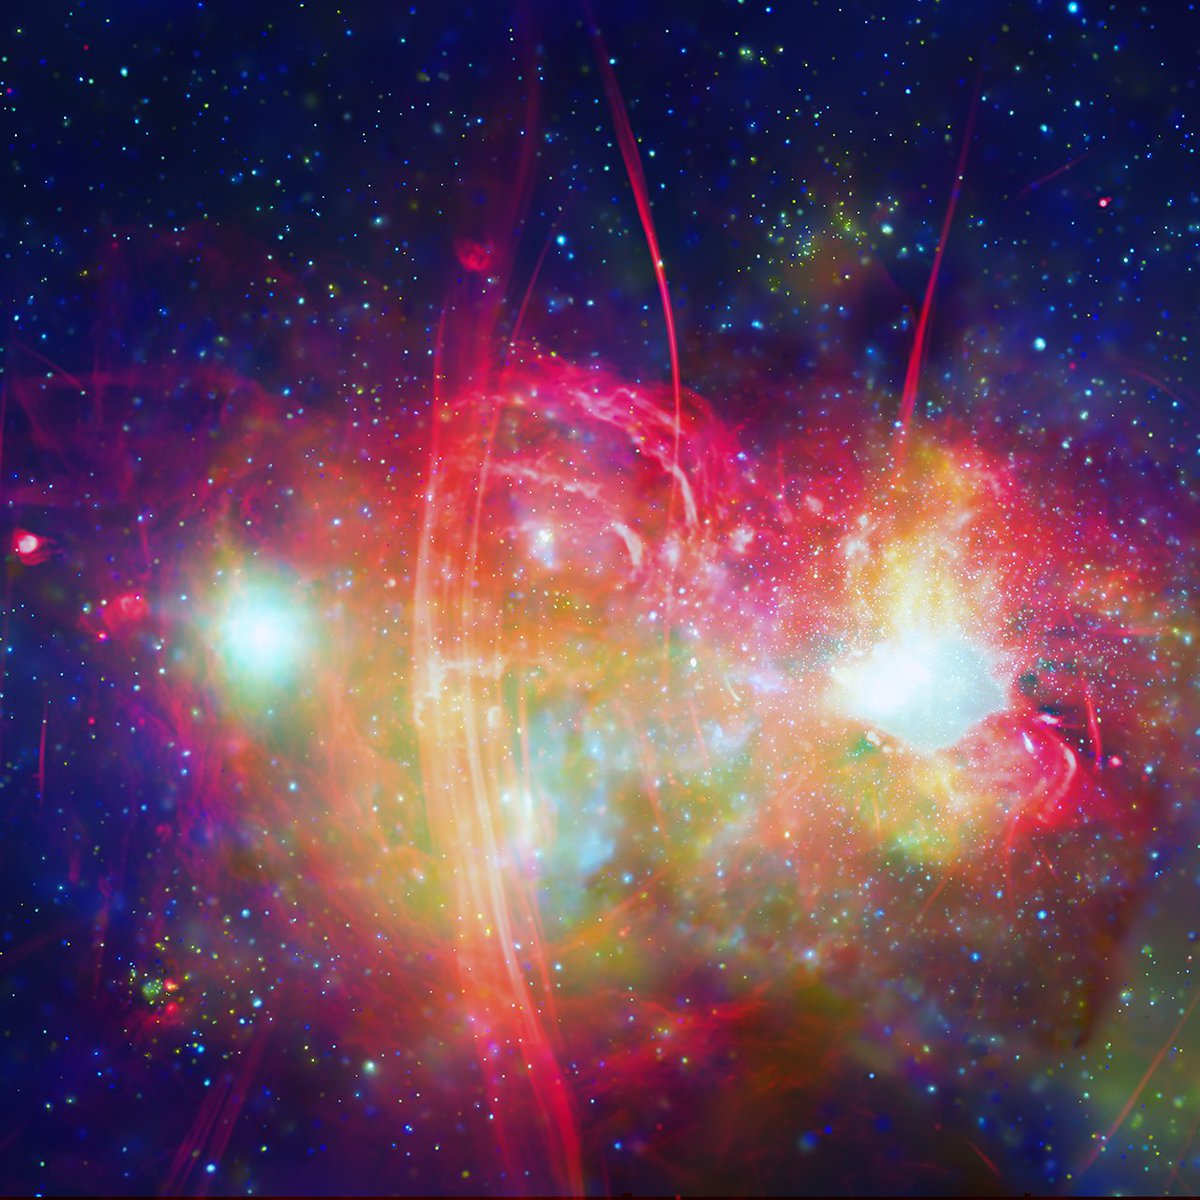 This is the center of our Milky Way galaxy in X-ray and radio light. Some of the exotic objects located here include clouds of gas in the millions of degrees, neutron stars ripping other stars apart, and Sagittarius A* — the supermassive black hole at our galaxy's core.